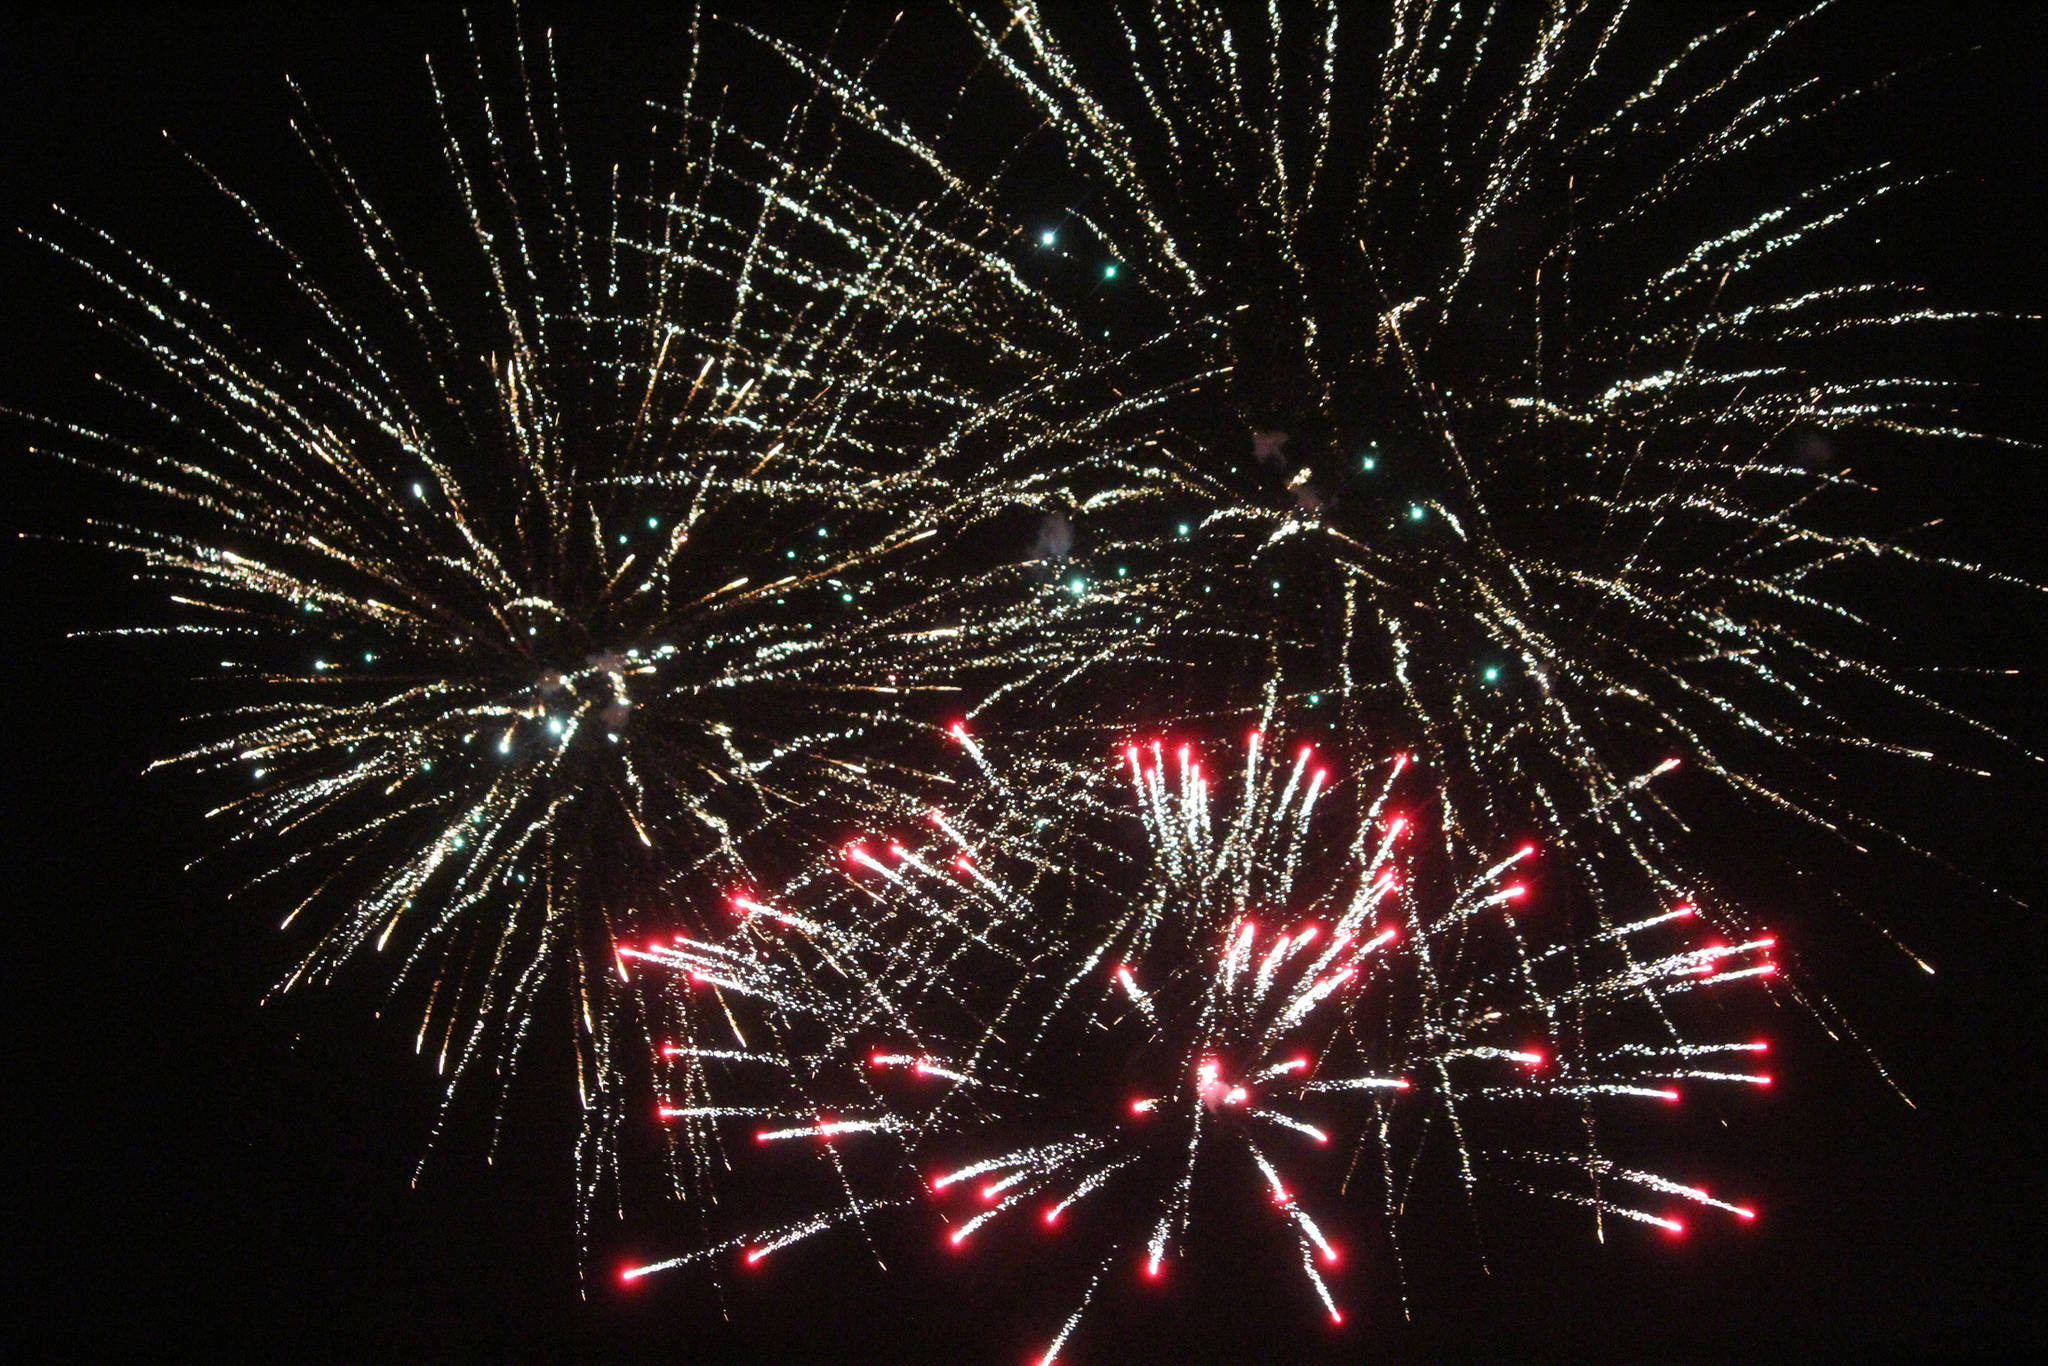 Homer gets second year of crowdfunded fireworks